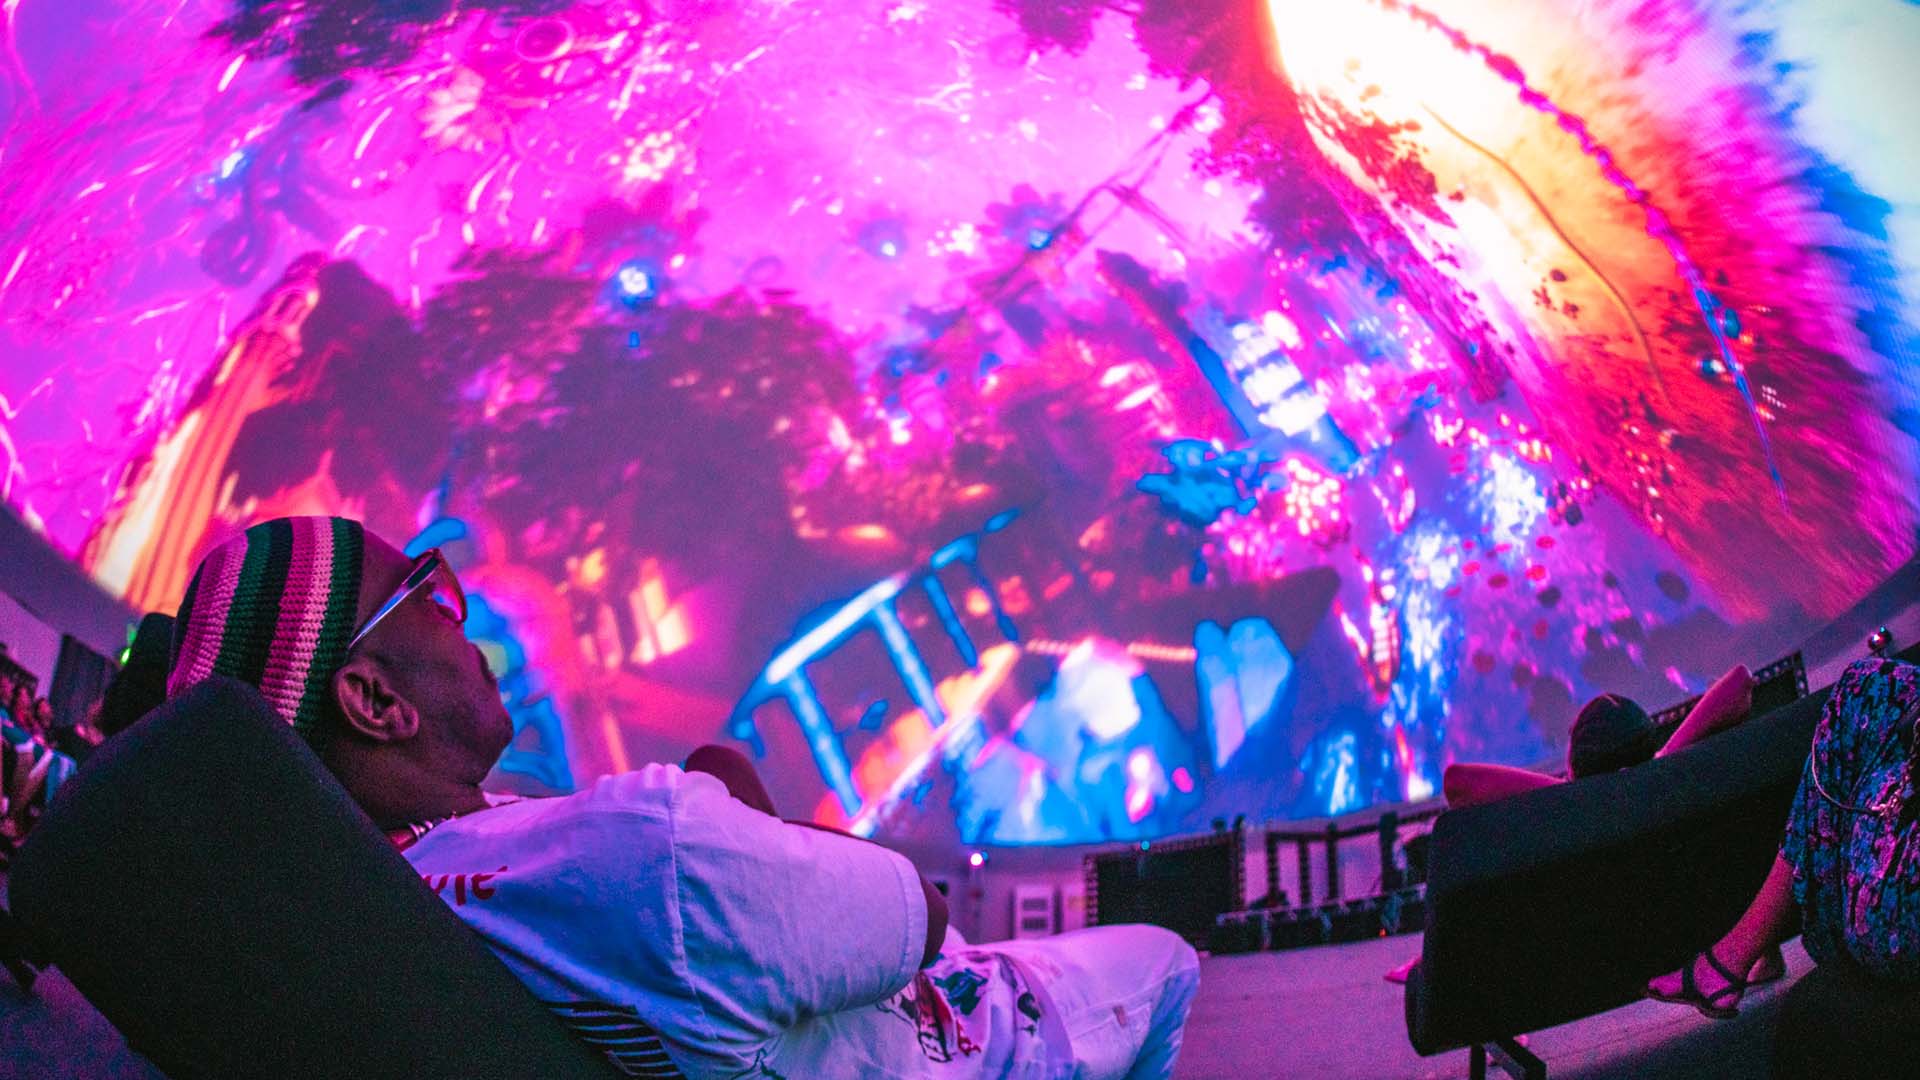 Wonderdome Is Sydney's New Pop-Up Cinema That's Screening Immersive 360-Degree Films in a Giant Dome